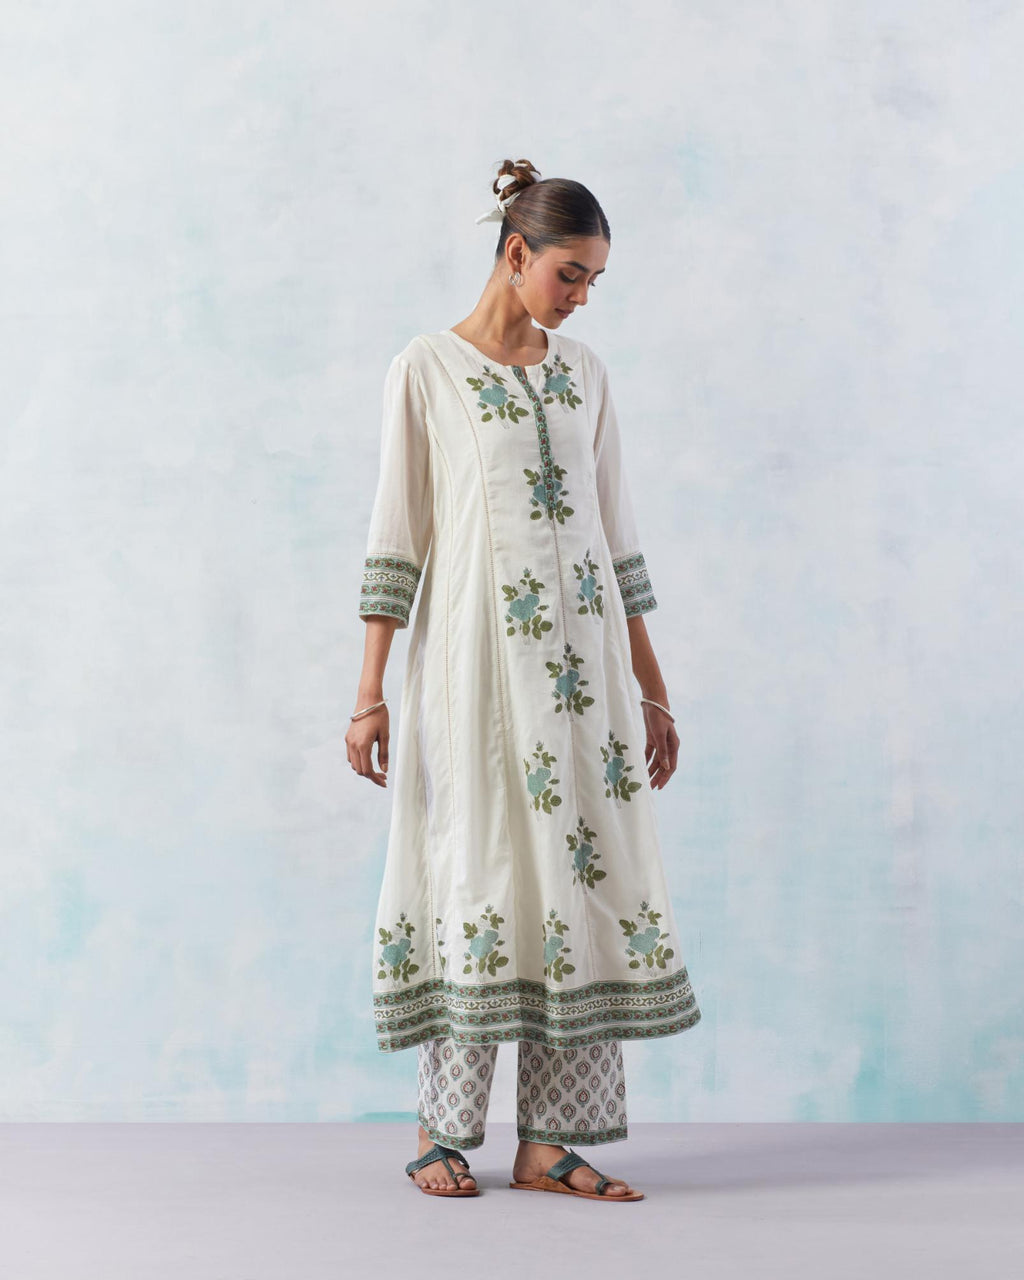 Off white cotton hand block printed A-line kurta set with teal green flower boota and faggoting detailing.